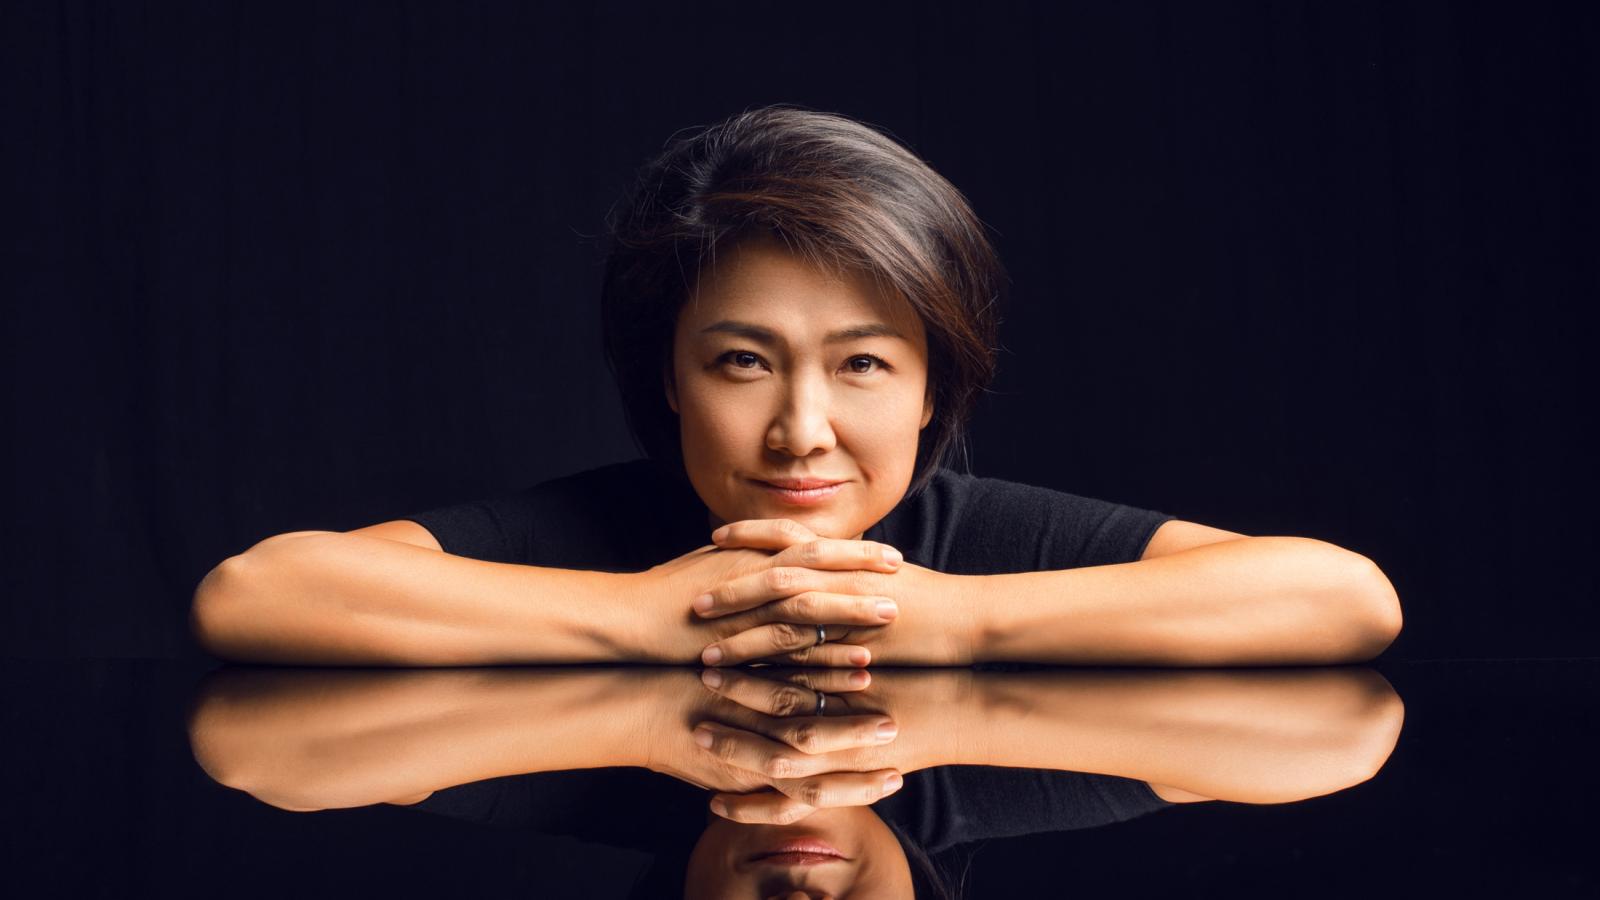 SOHO China's Zhang Xin became a billionaire by falling in love